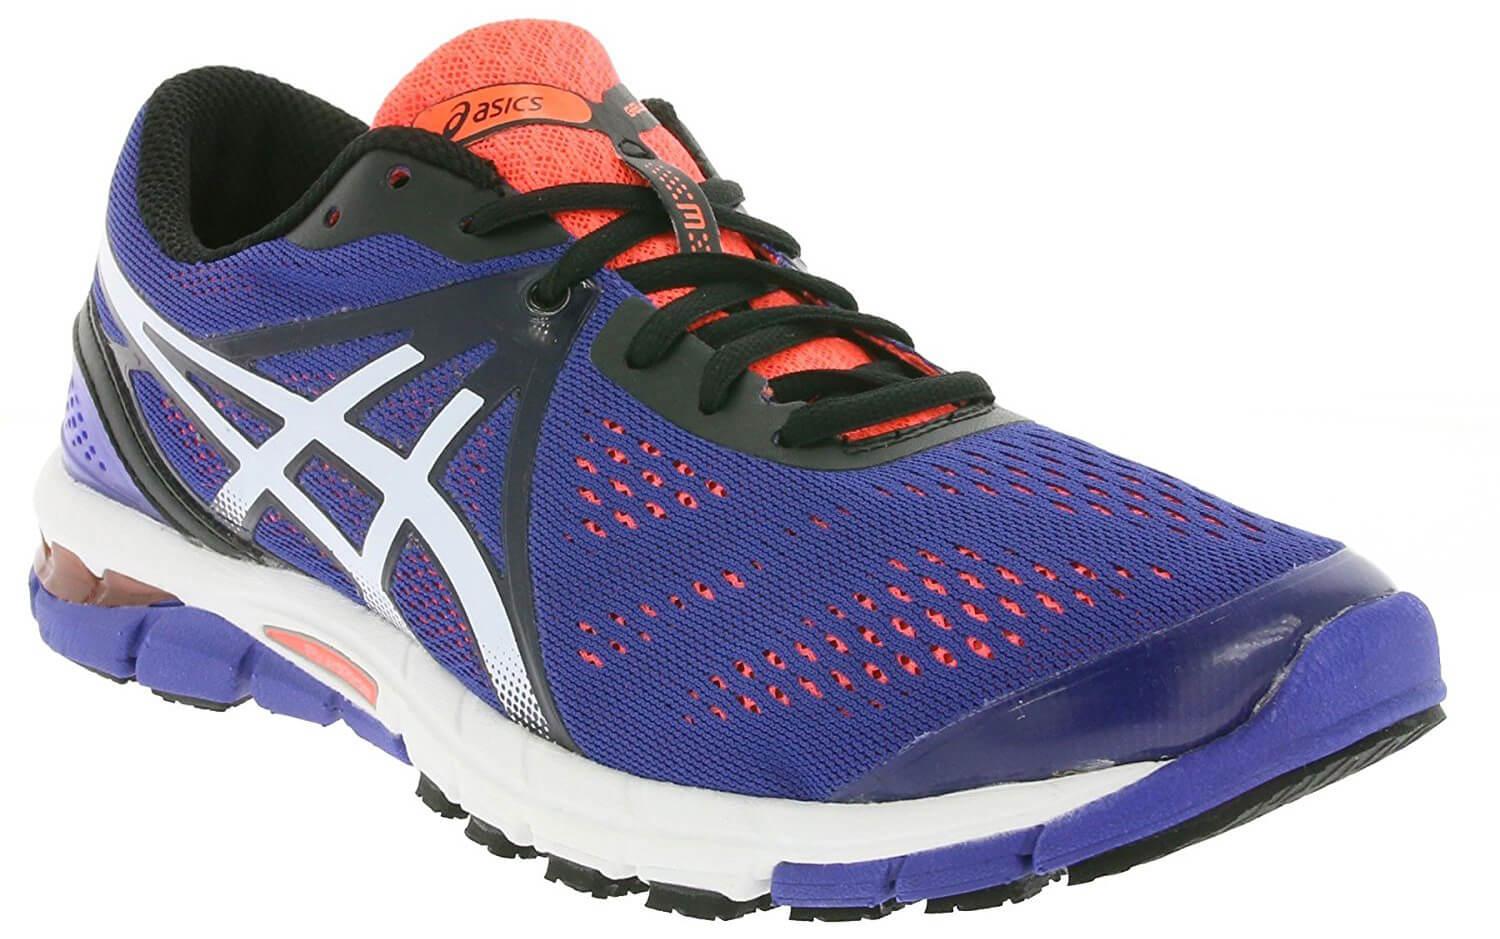 A three quarter perspective of the Asics Gel Excel33